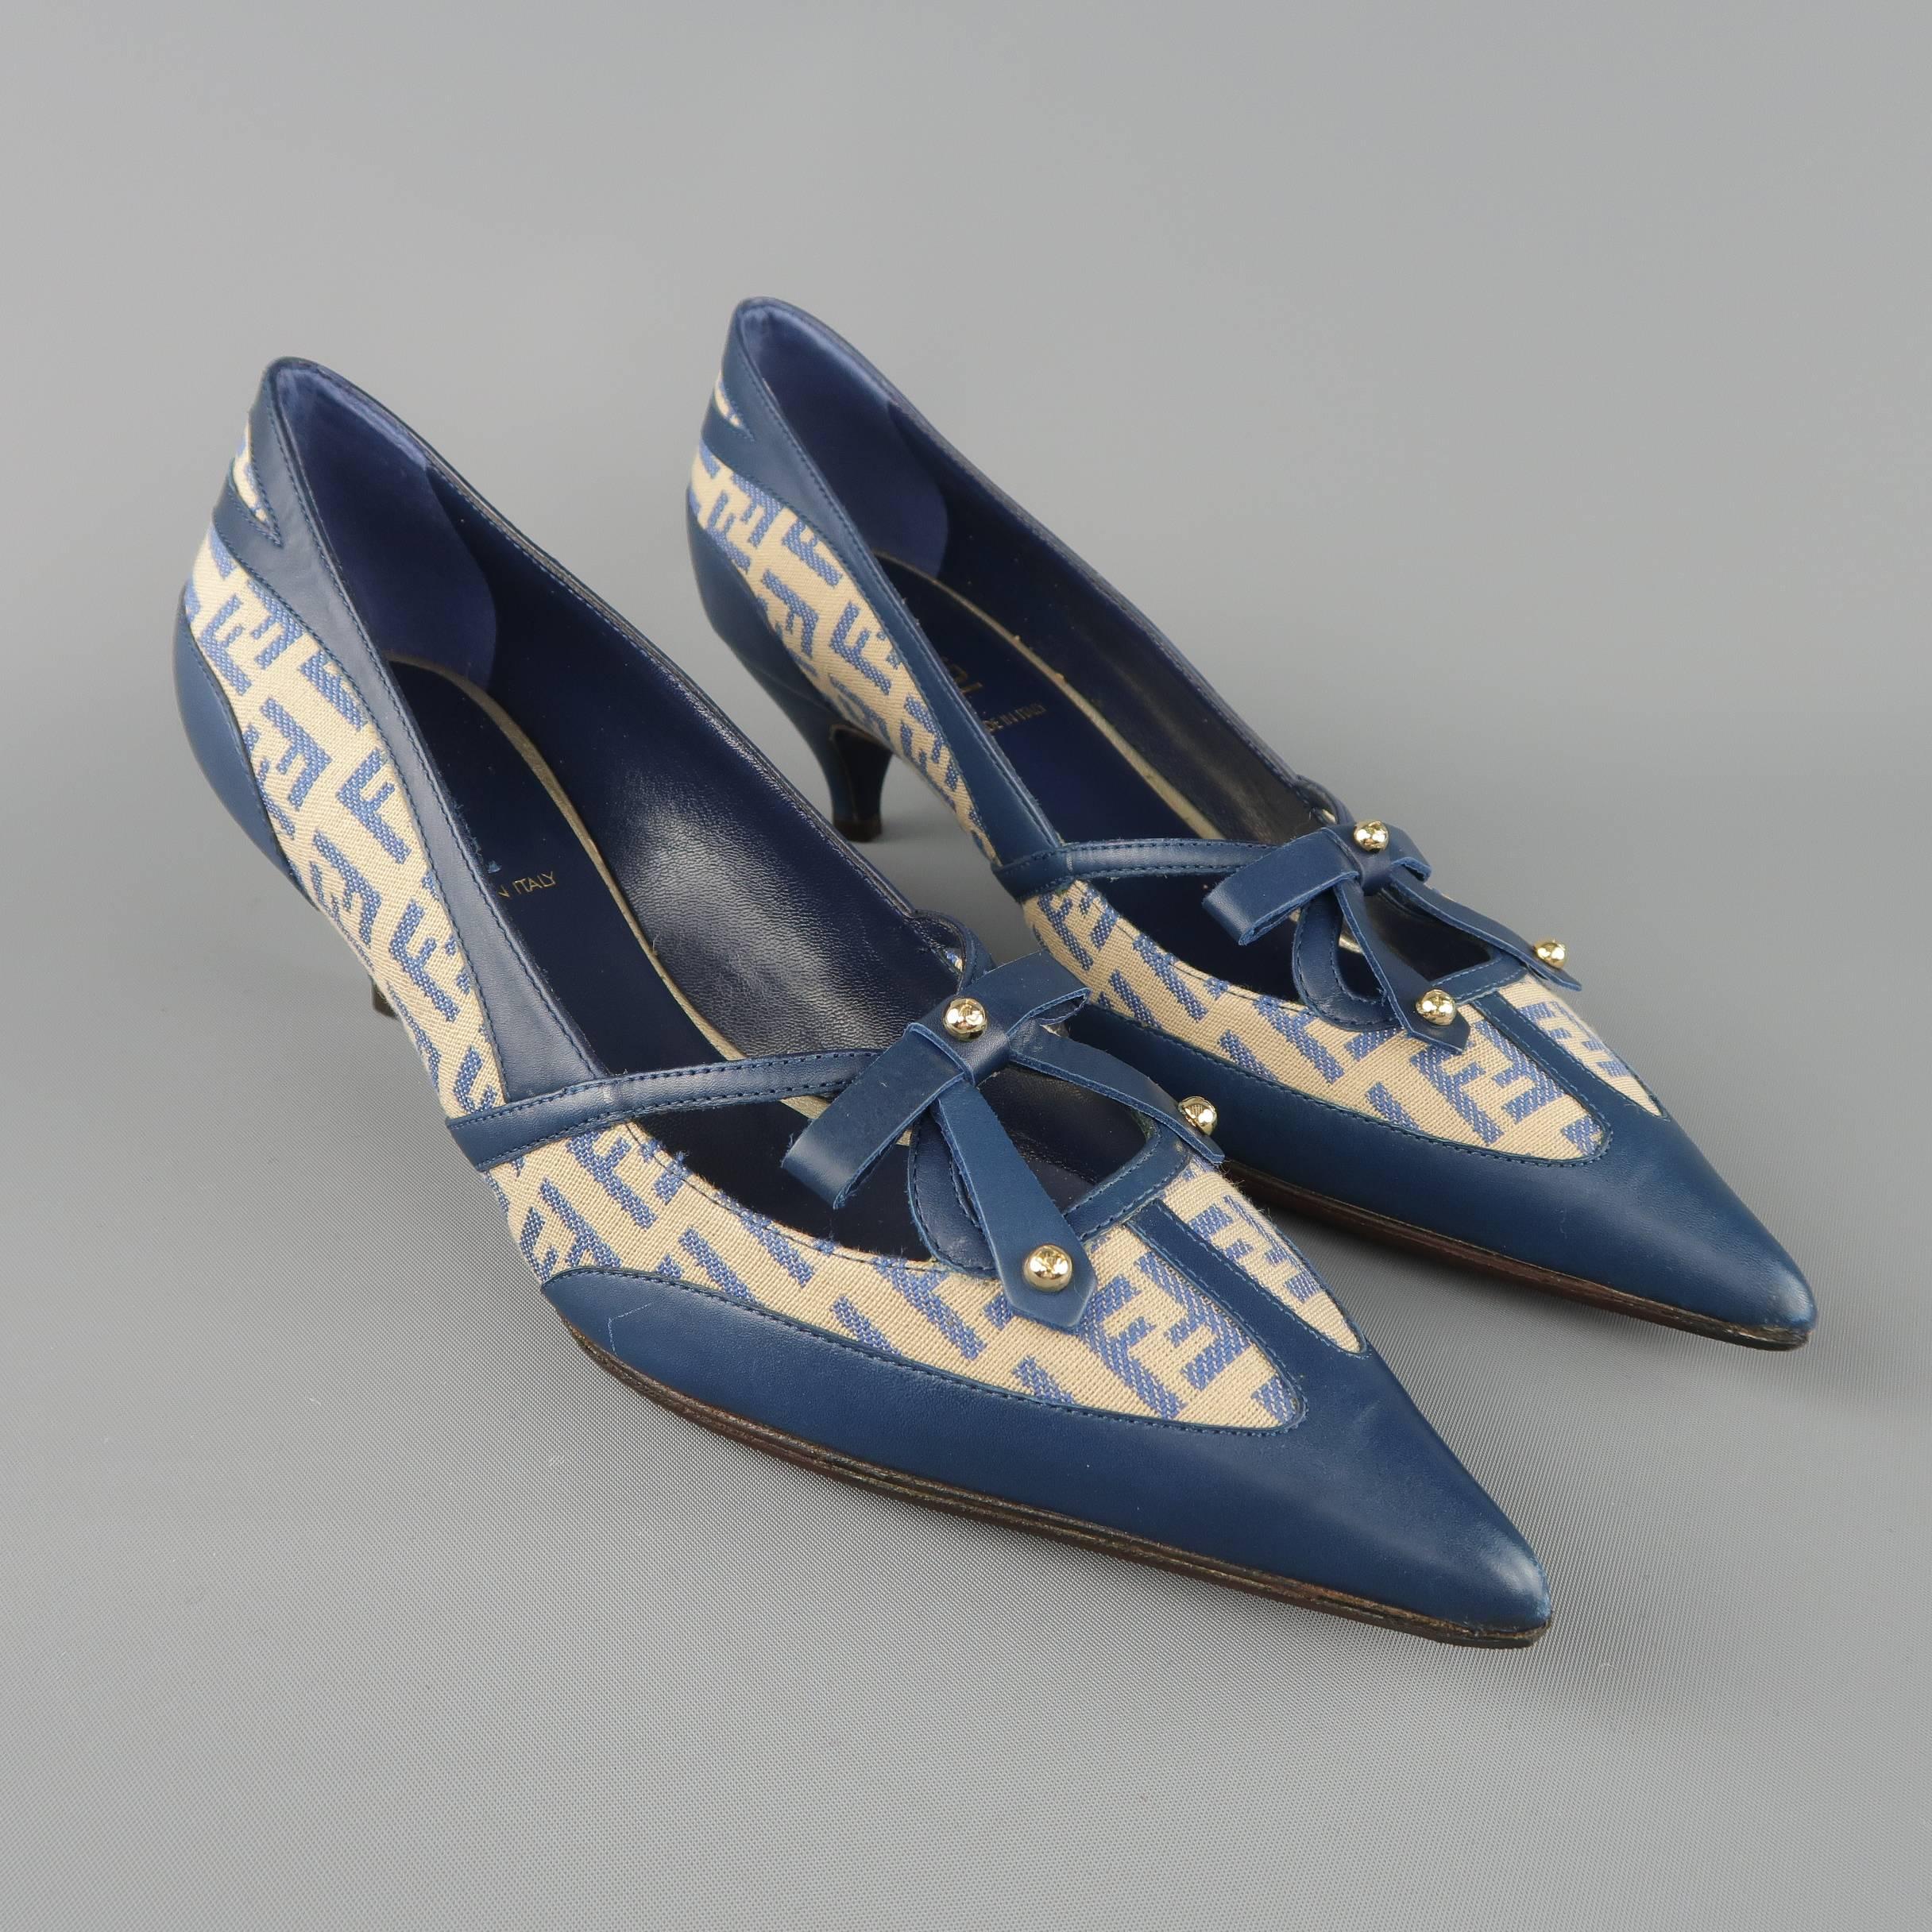 Archive FENDI pumps come in navy blue leather with blue and beige Zucca monogram print canvas panels and feature a pointed toe with bow detail and covered kitten heel. Custom tope soles added. Made in Italy.
 
Good Pre-Owned Condition. Brand